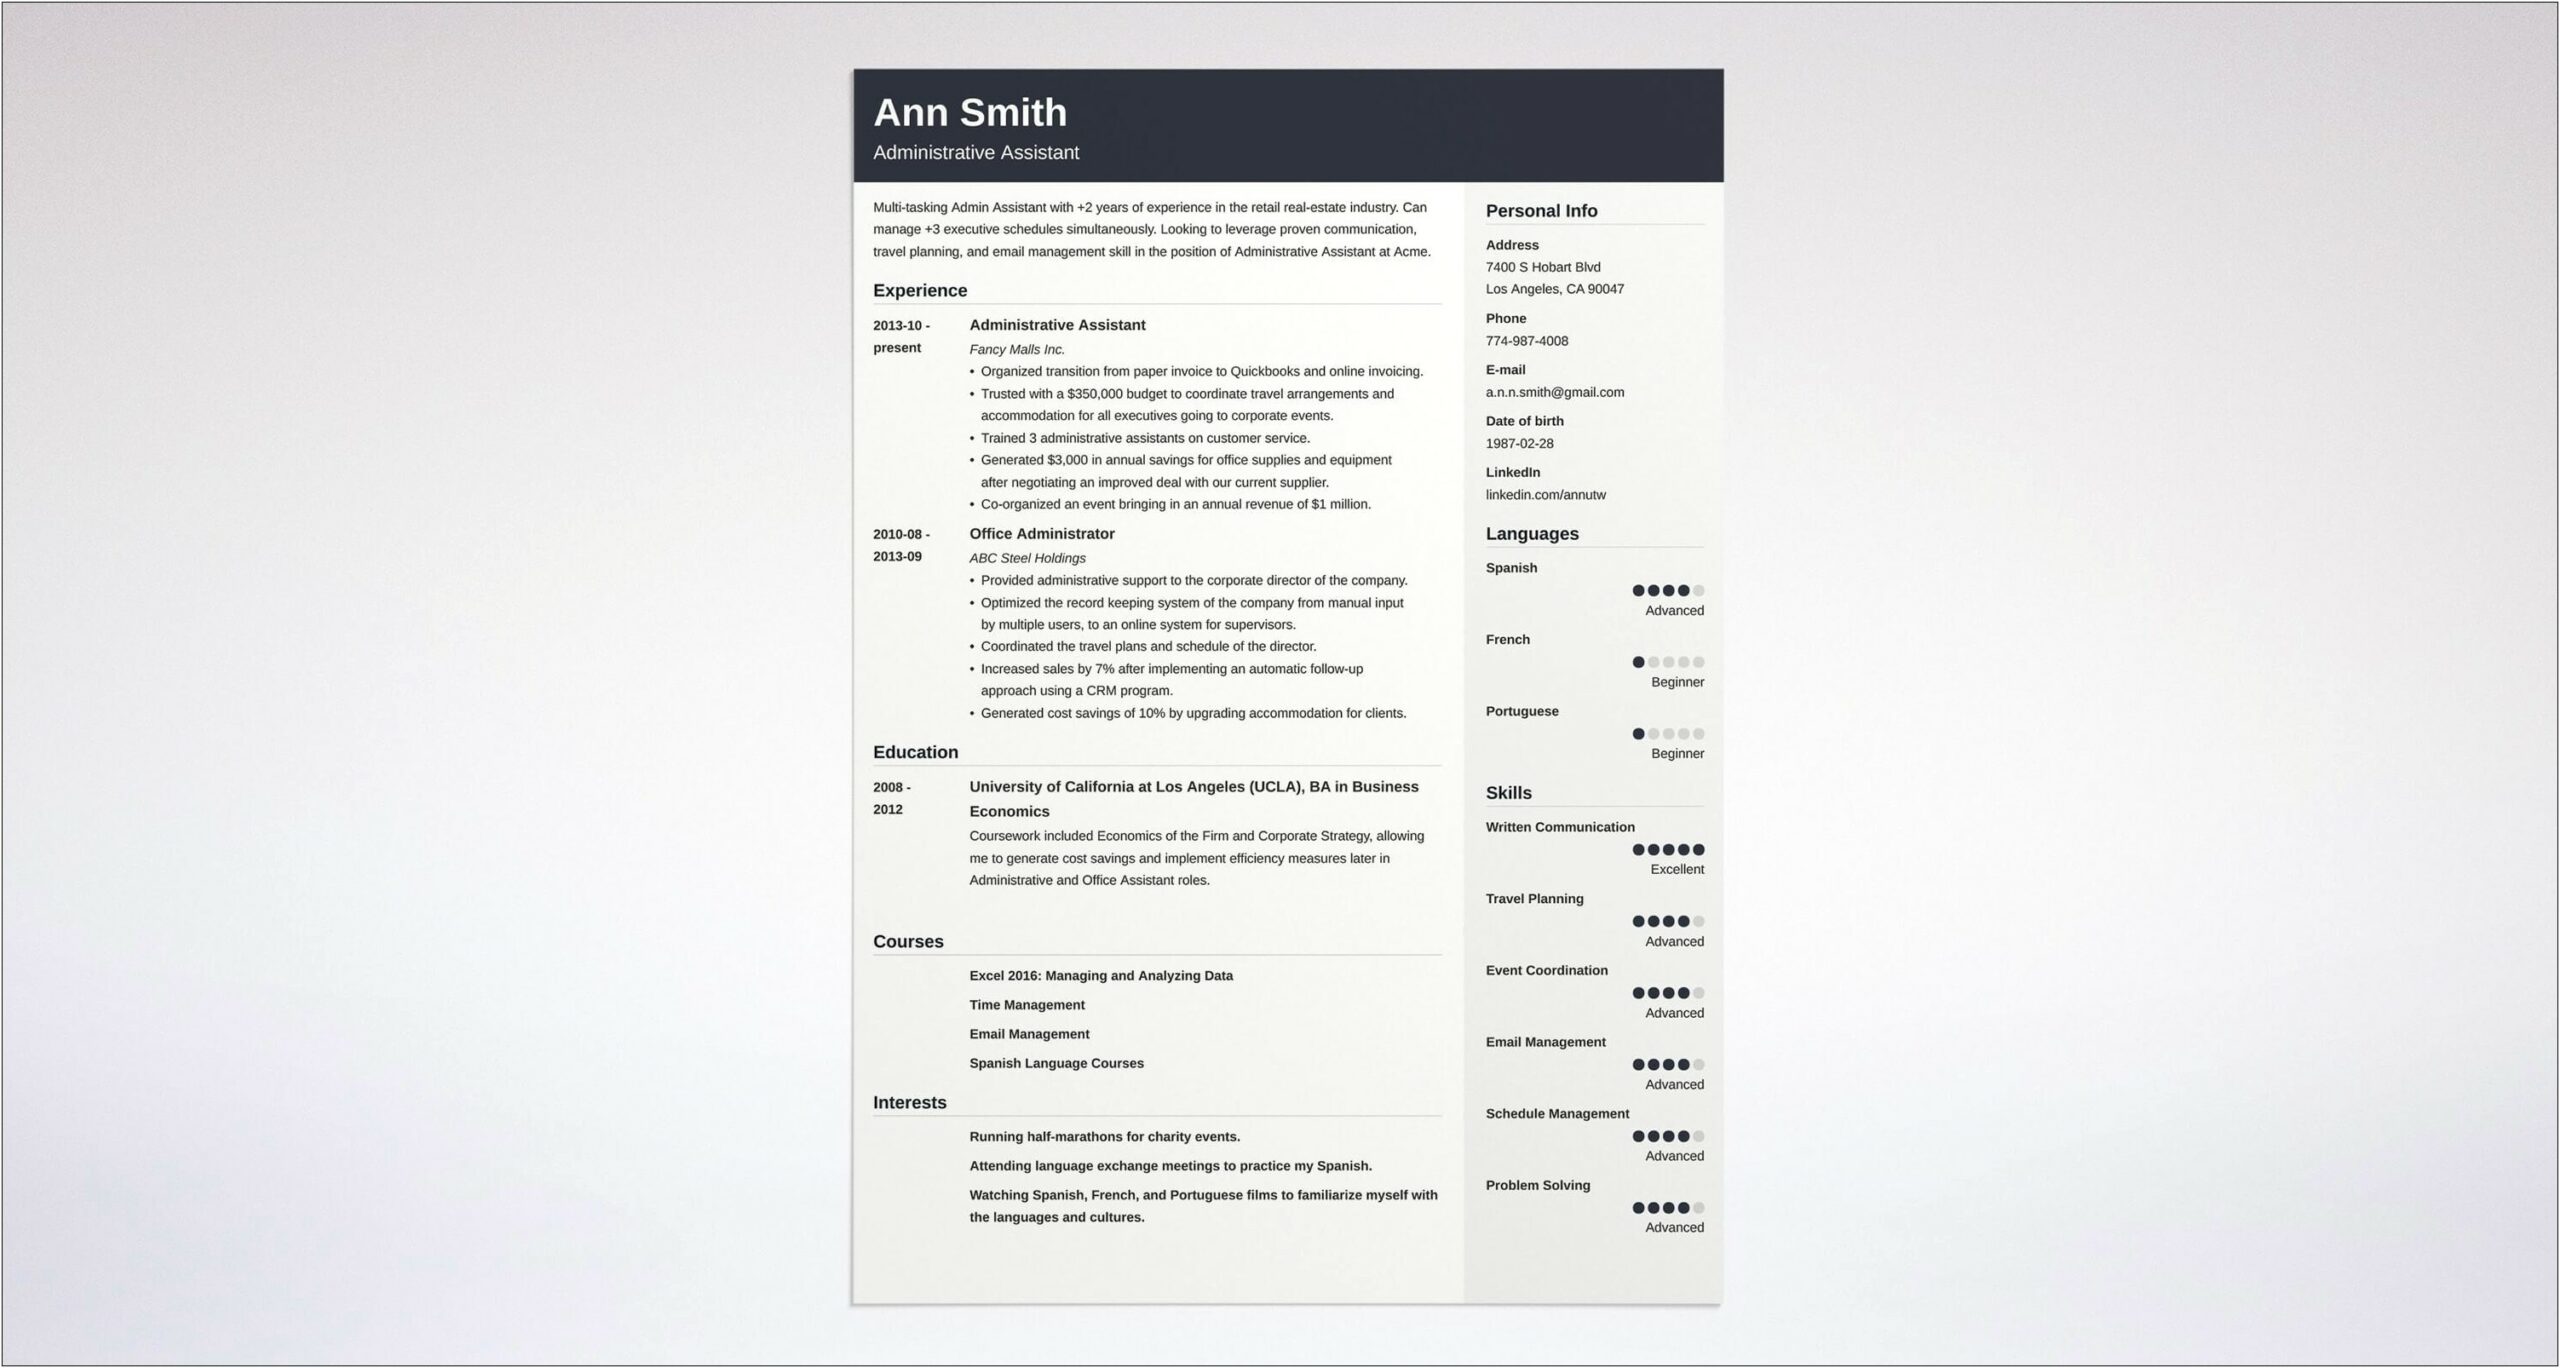 Best Administrative Assistant Resume Examples